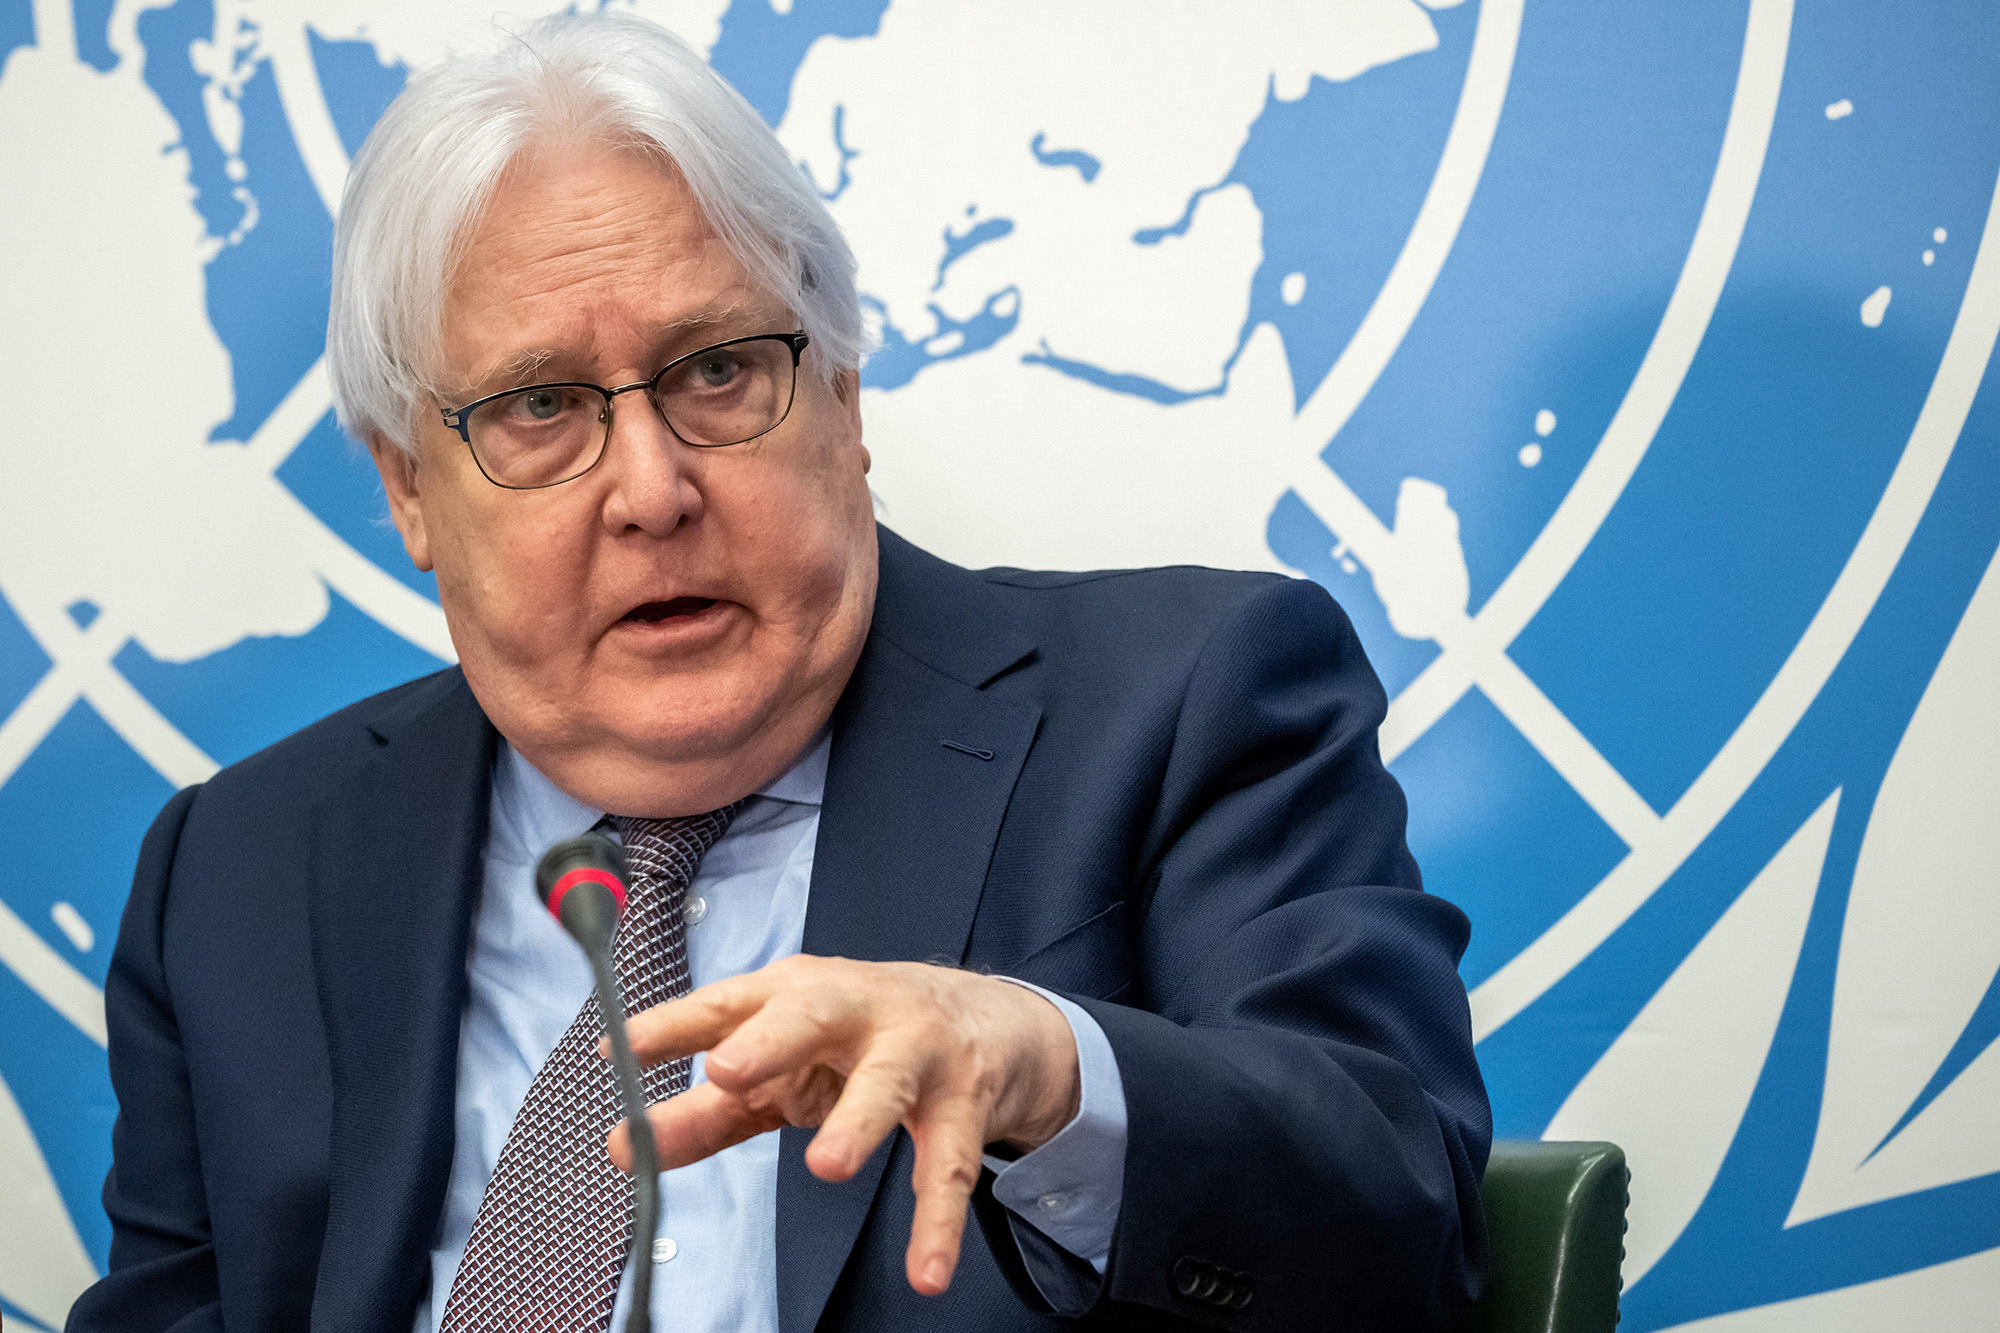 UN Emergency Relief Coordinator Martin Griffiths speaks during a joint press conference in Geneva, Switzerland, on February 27.